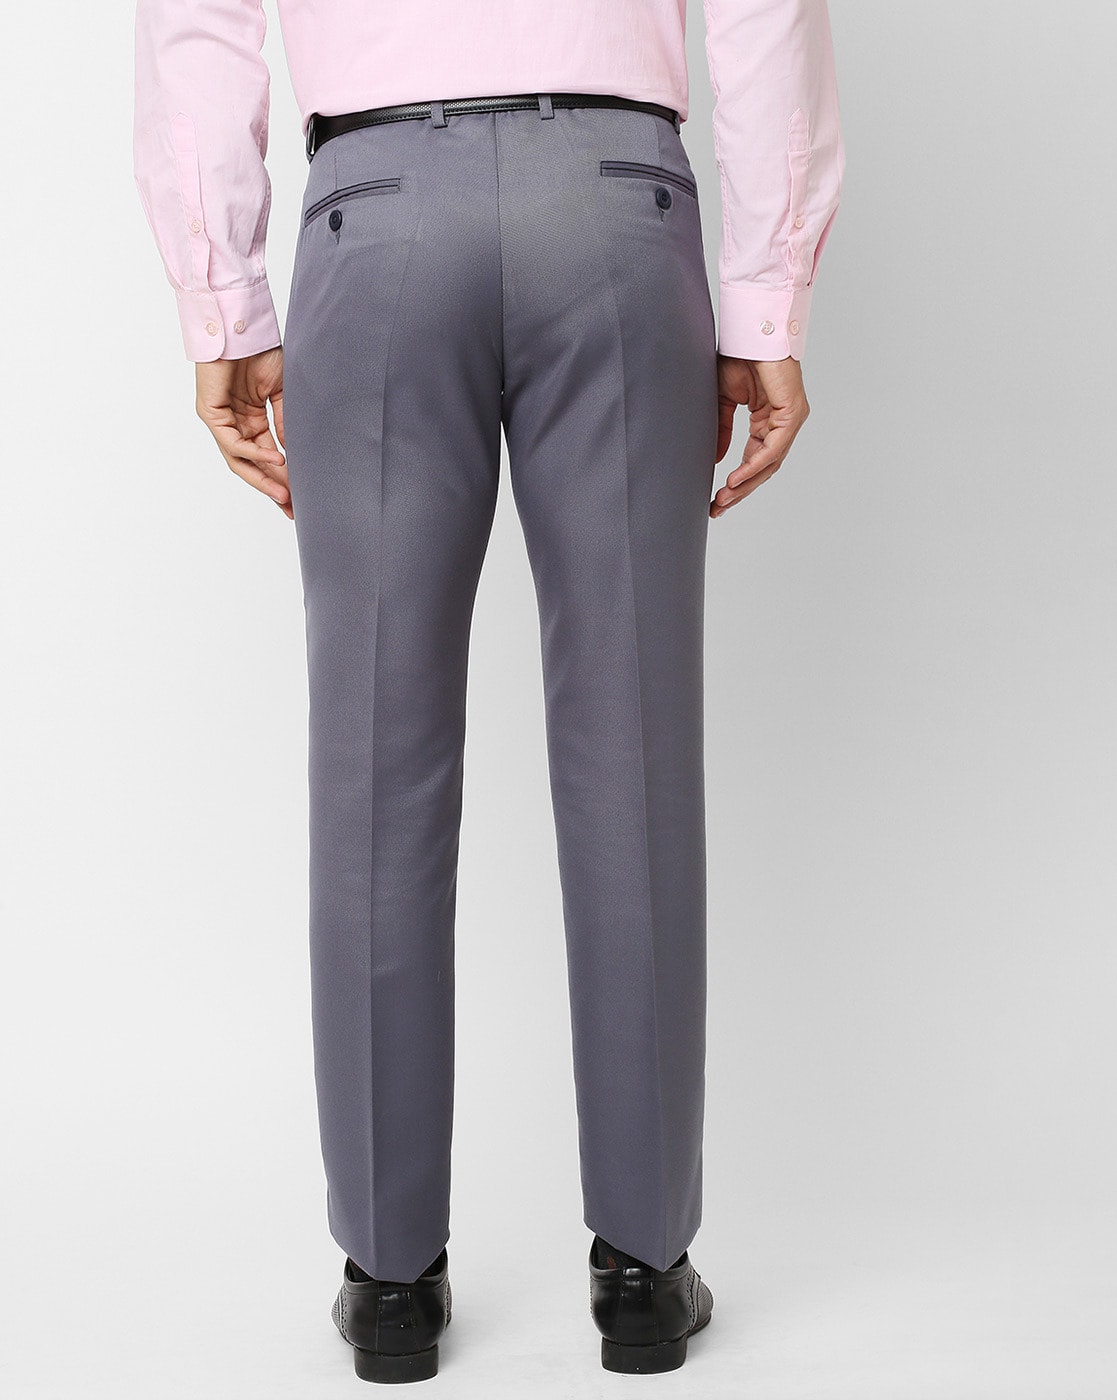 175 SLIM FIT TROUSERS | Grey | SELECTED HOMME®